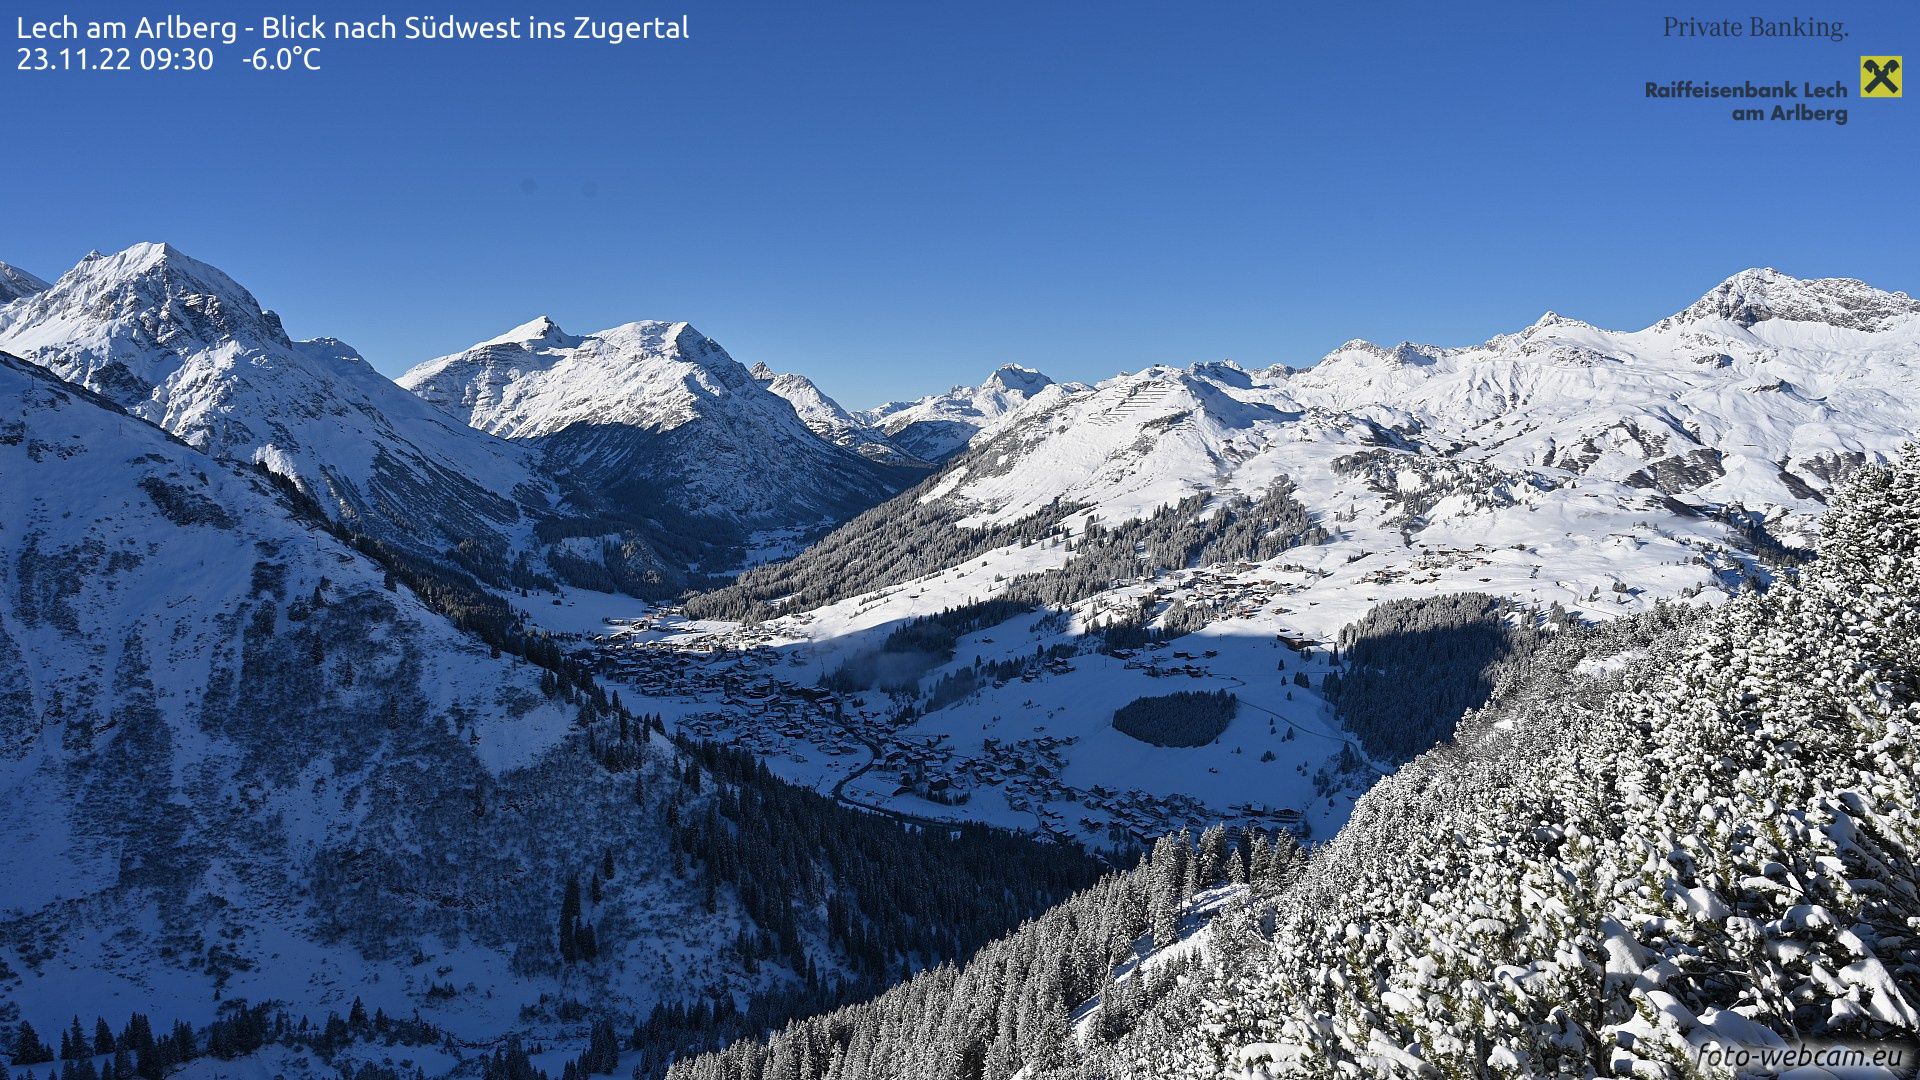 Wintry Lech after the snowfall of yesterday (foto-webcam.eu)